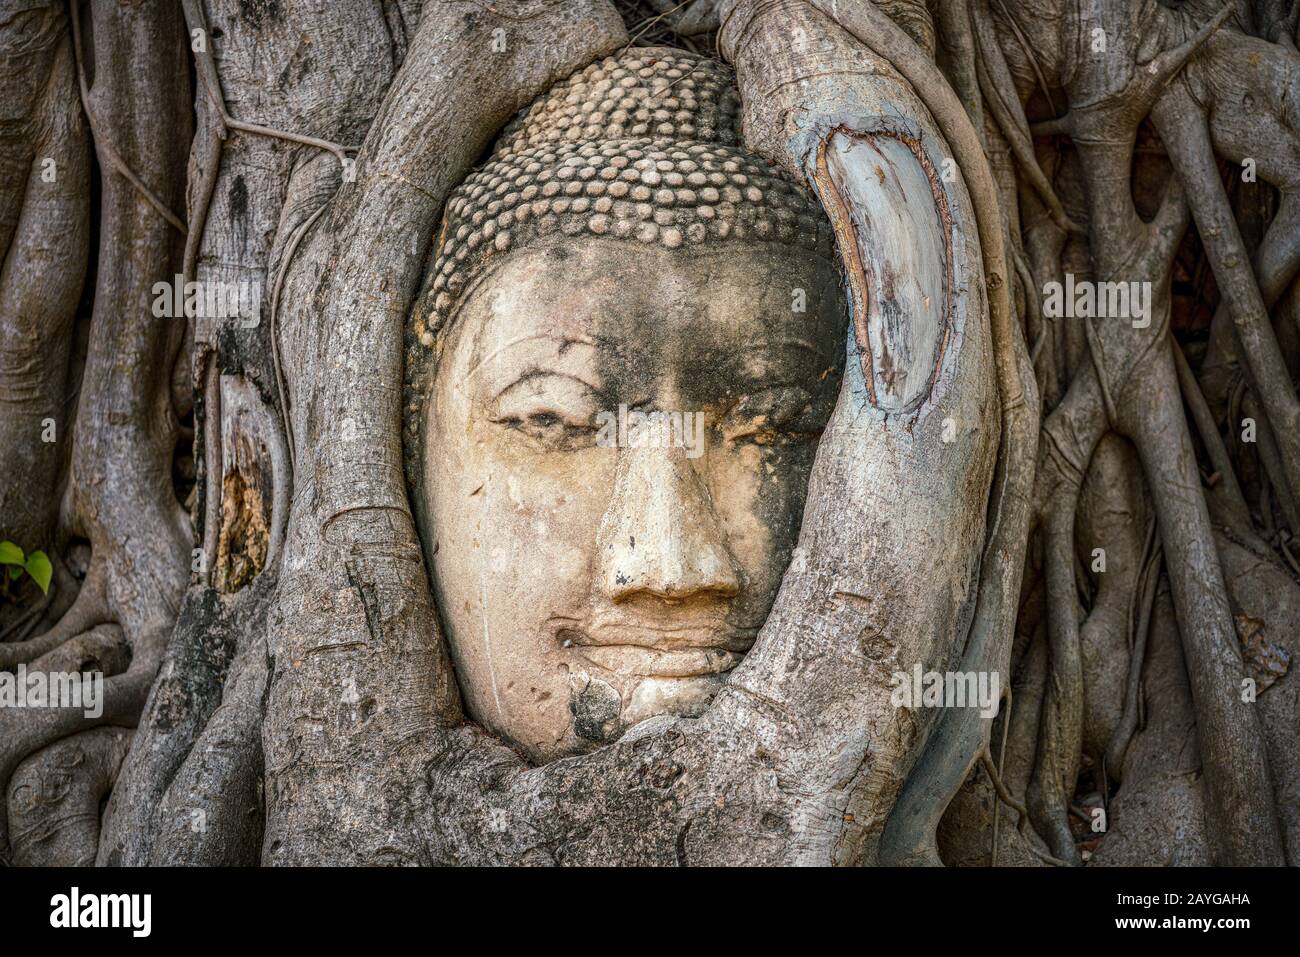 Buddha head trapped in bodhy tree roots in Wat Mahathat Temple, Ayutthaya.  Bangkok province, Thailand Stock Photo